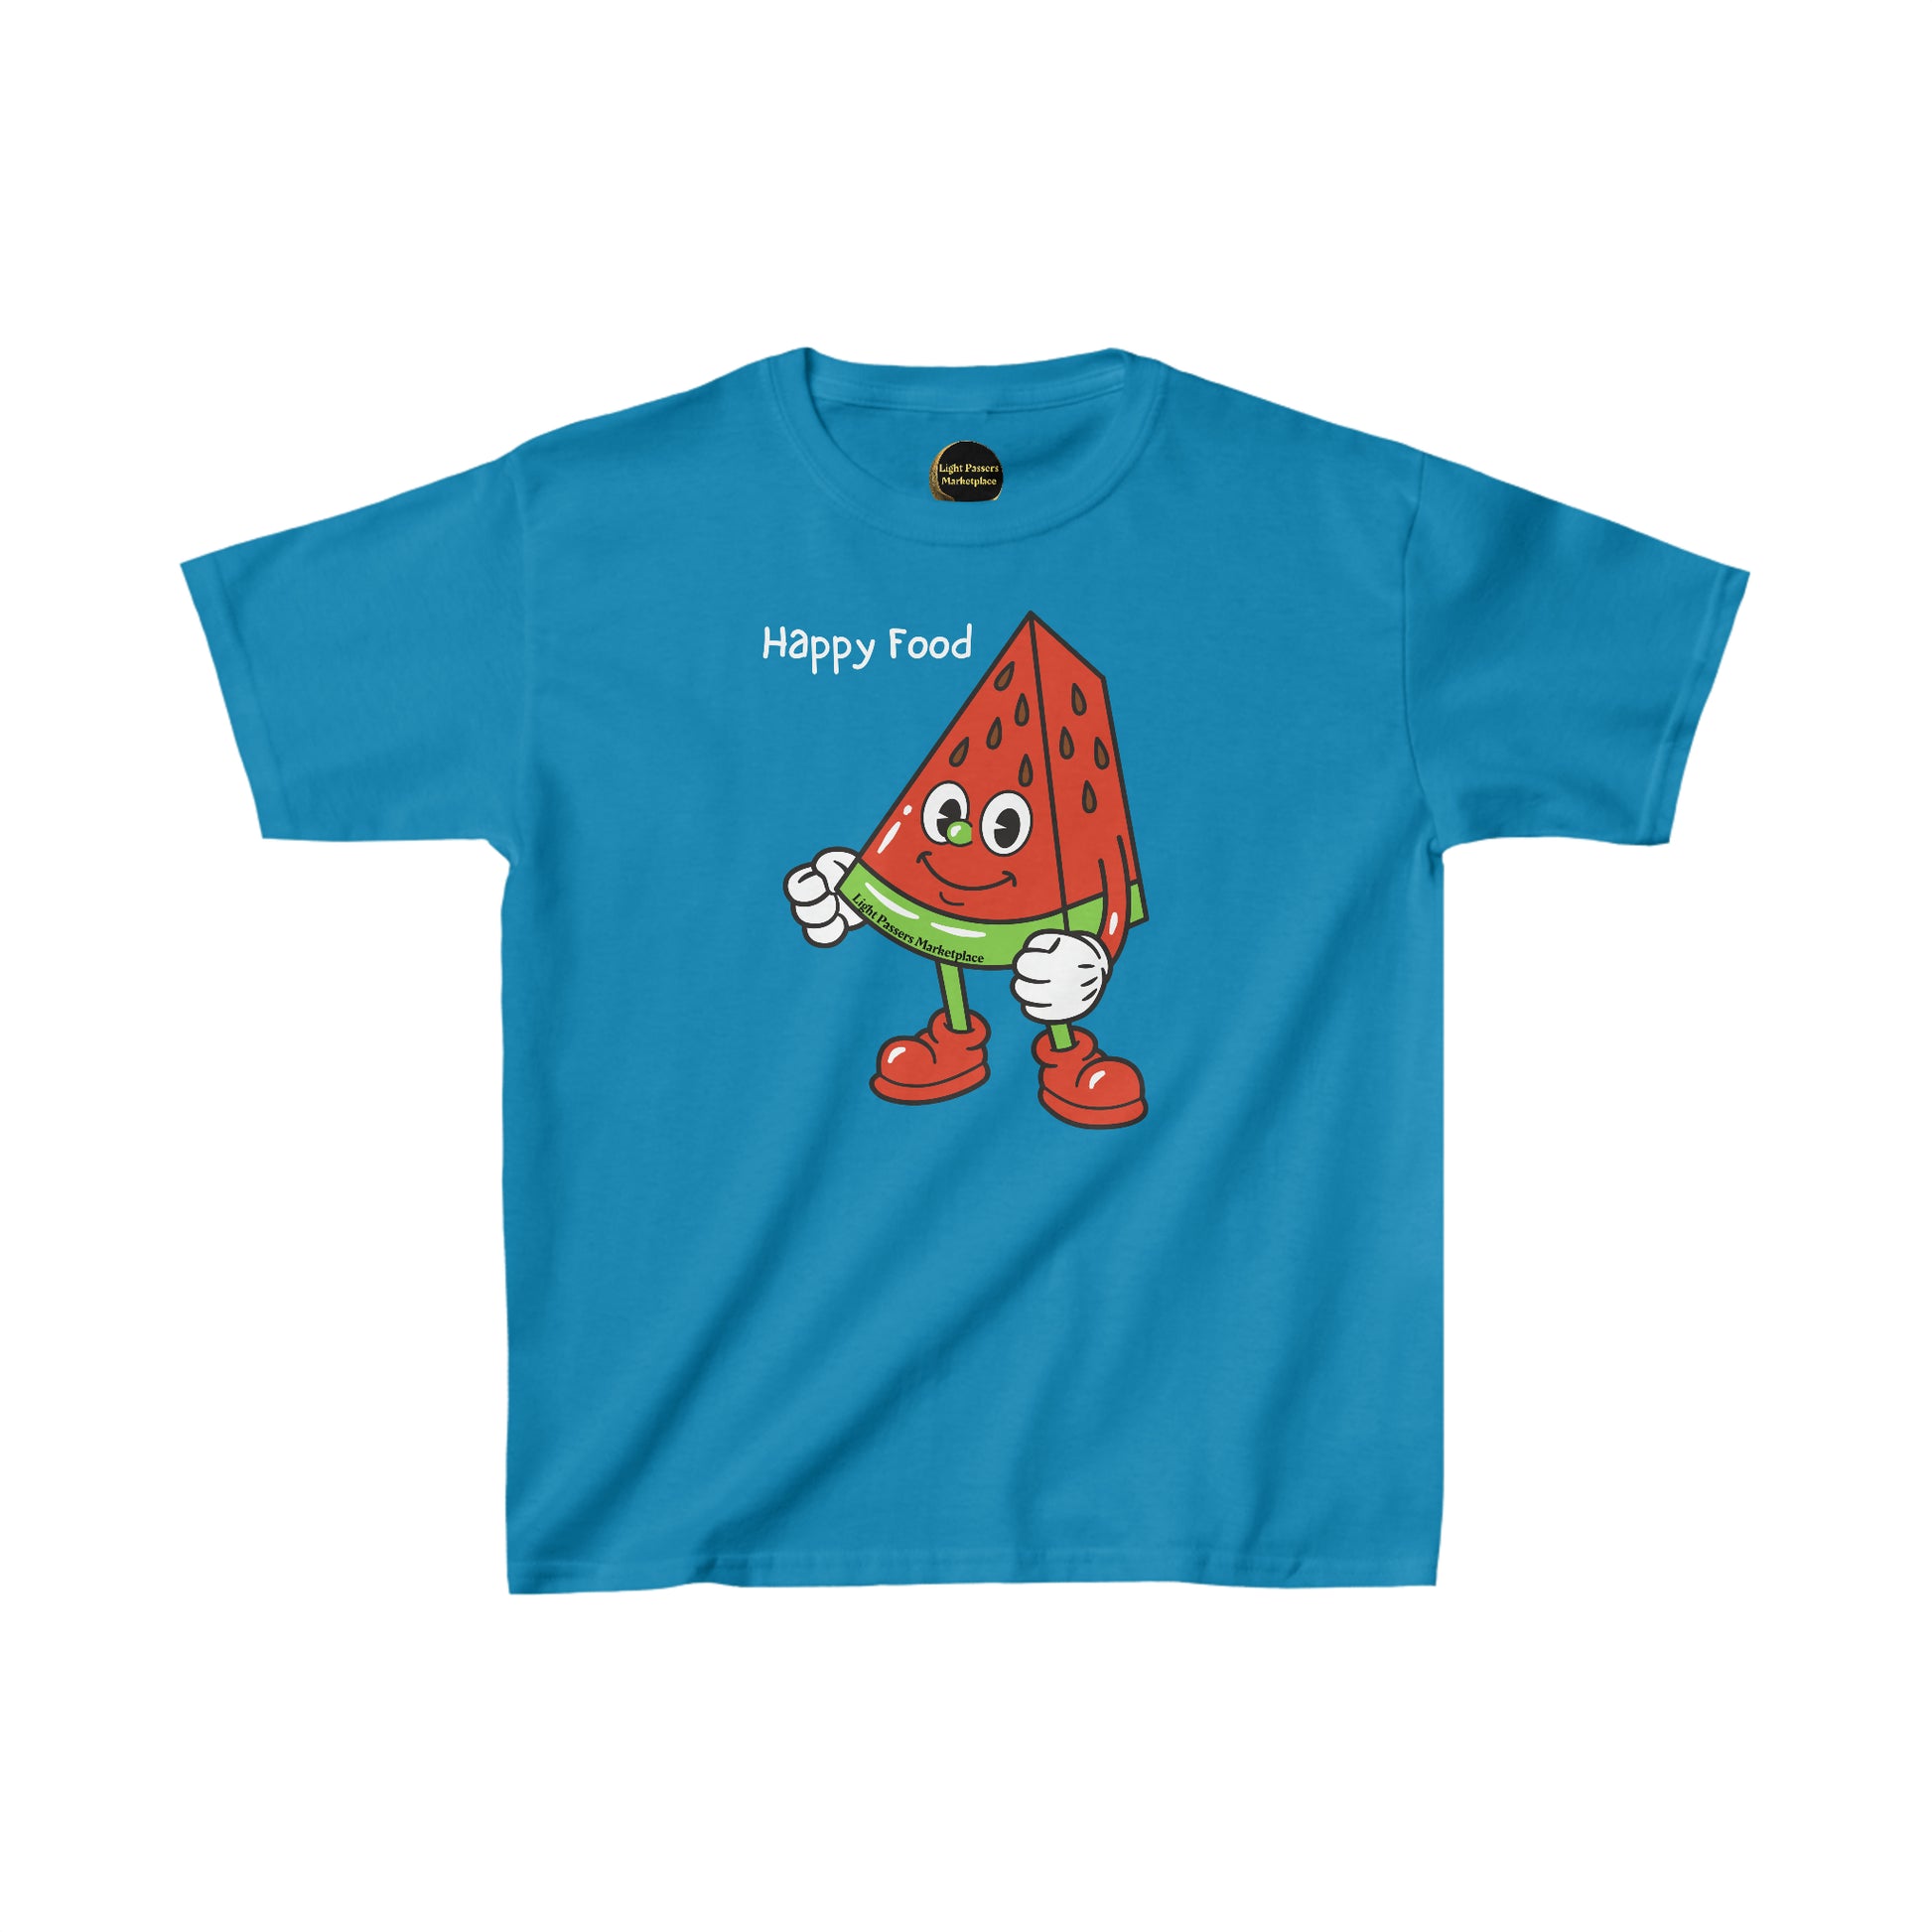 A blue youth t-shirt featuring a cartoon watermelon character, made of 100% cotton with twill tape shoulders for durability and a curl-resistant collar. Ethically sourced and Oeko-Tex certified for safety.